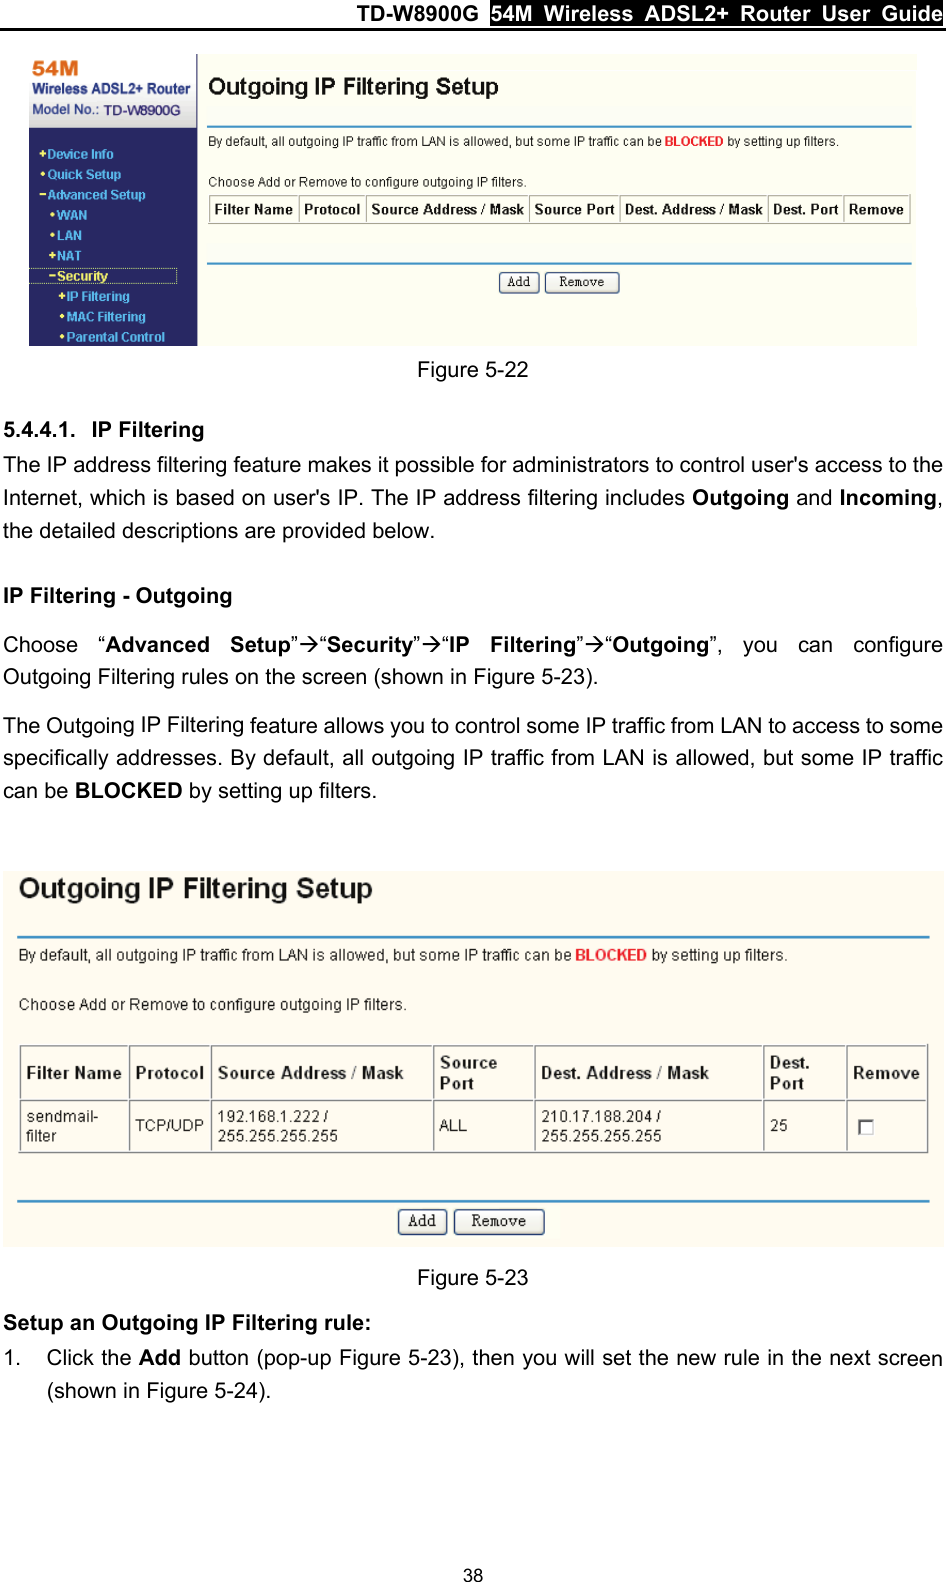 TD-W8900G  54M Wireless ADSL2+ Router User Guide 38  Figure 5-22 5.4.4.1.  IP Filtering The IP address filtering feature makes it possible for administrators to control user&apos;s access to the Internet, which is based on user&apos;s IP. The IP address filtering includes Outgoing and Incoming, the detailed descriptions are provided below. IP Filtering - Outgoing Choose “Advanced Setup”Æ“Security”Æ“IP Filtering”Æ“Outgoing”, you can configure Outgoing Filtering rules on the screen (shown in Figure 5-23). The Outgoing IP Filtering feature allows you to control some IP traffic from LAN to access to some specifically addresses. By default, all outgoing IP traffic from LAN is allowed, but some IP traffic can be BLOCKED by setting up filters.   Figure 5-23 Setup an Outgoing IP Filtering rule: 1. Click the Add button (pop-up Figure 5-23), then you will set the new rule in the next screen (shown in Figure 5-24). 